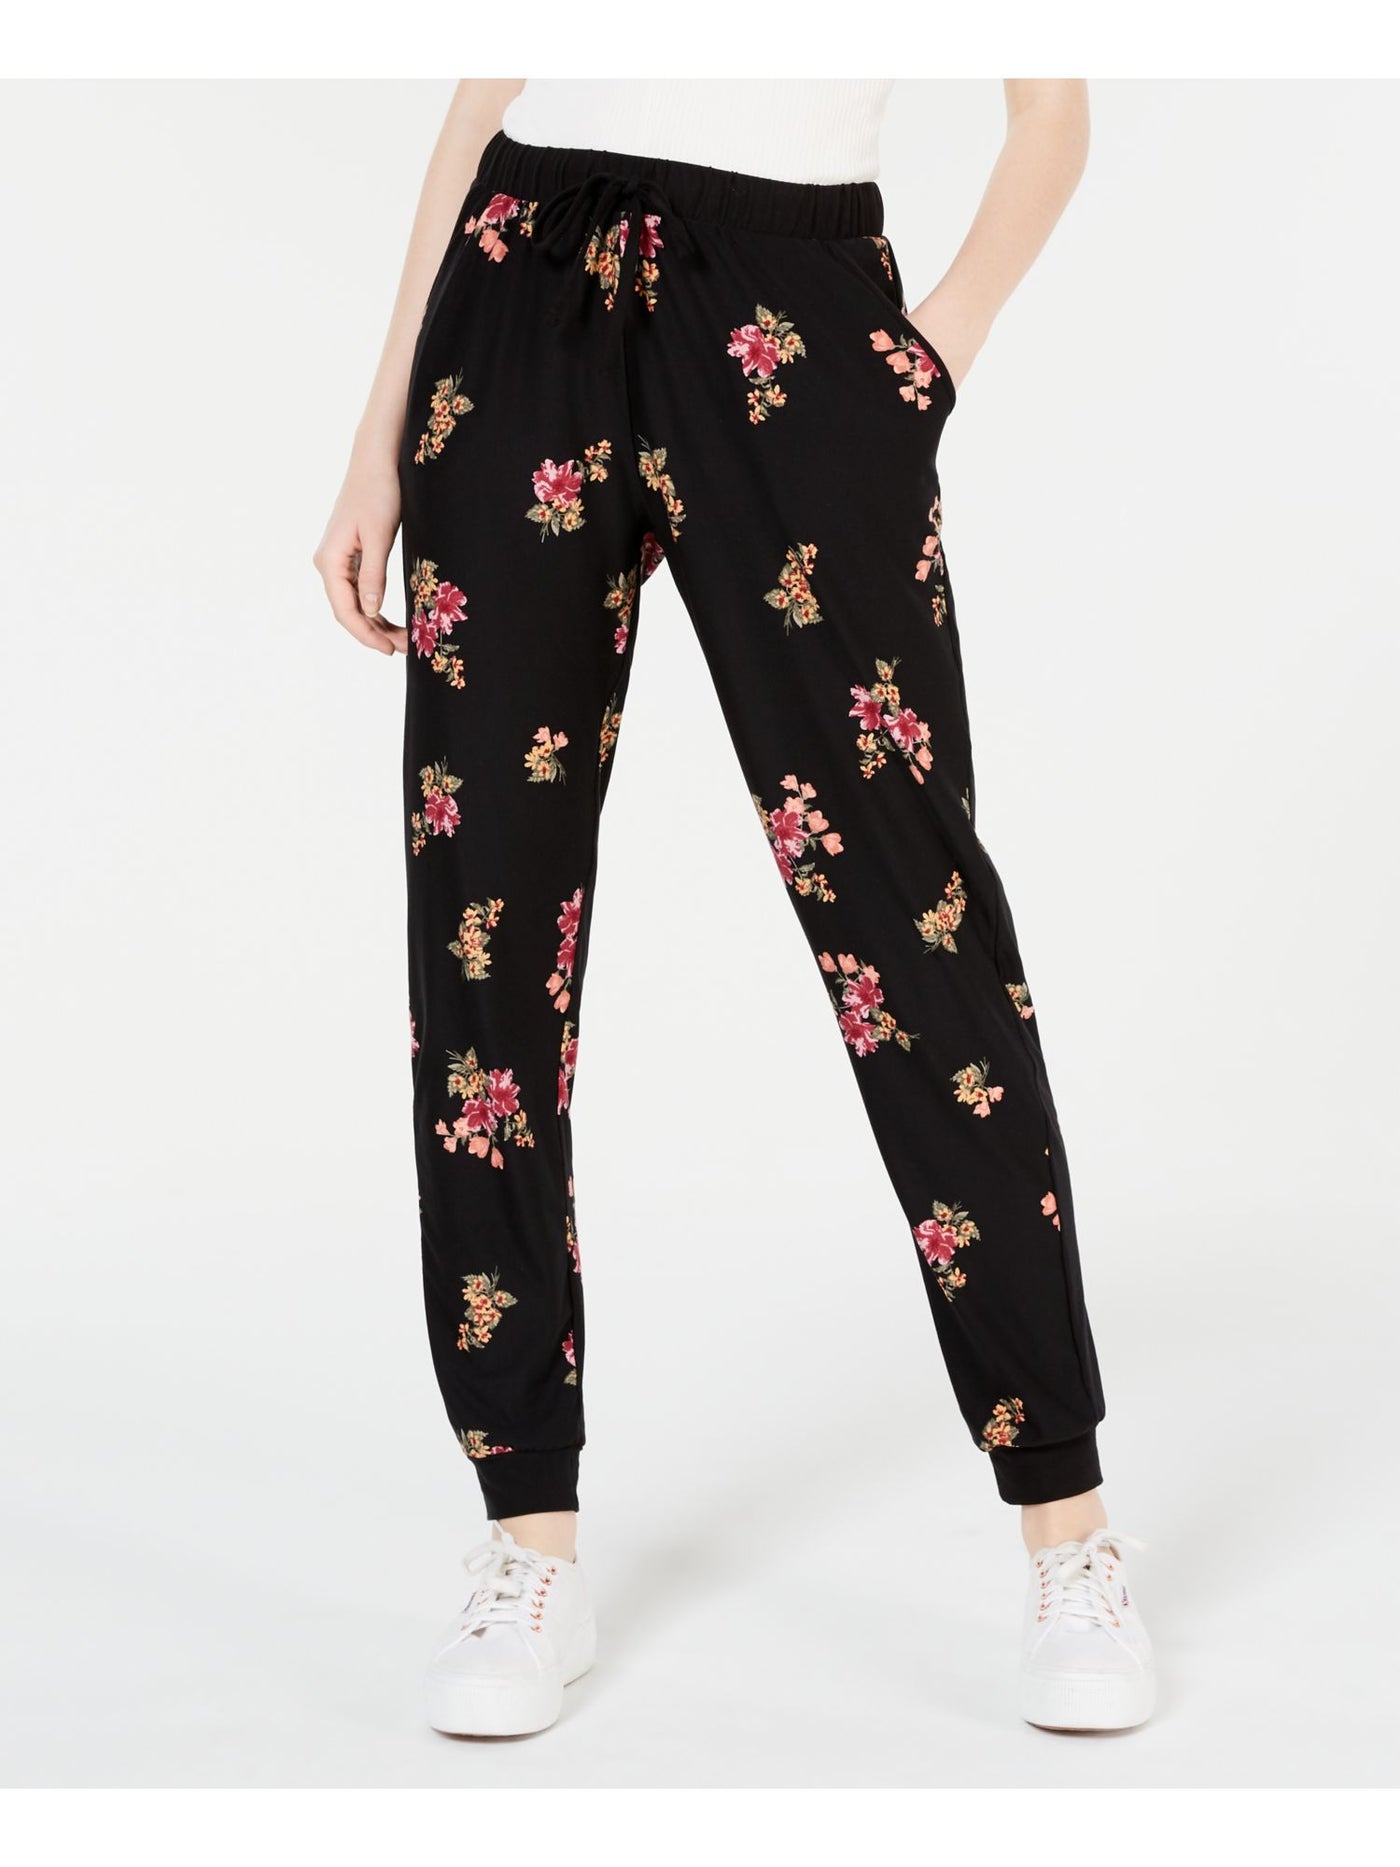 HIPPIE ROSE Womens Black Stretch Pocketed Tie Floral Cuffed Pants Juniors S